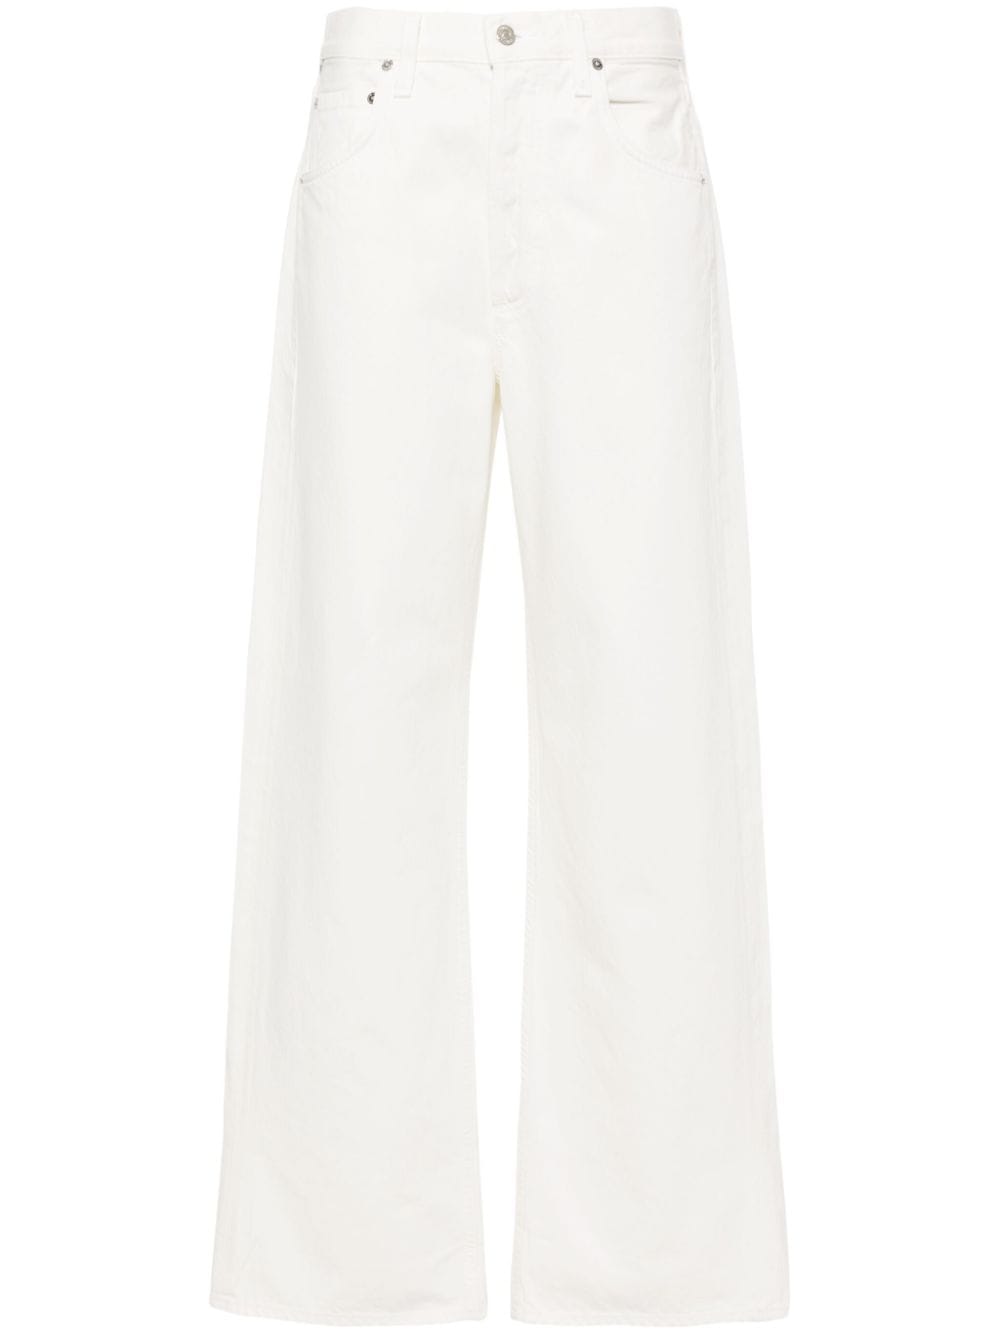 Citizens of Humanity Pmina high-rise wide-leg jeans - White von Citizens of Humanity